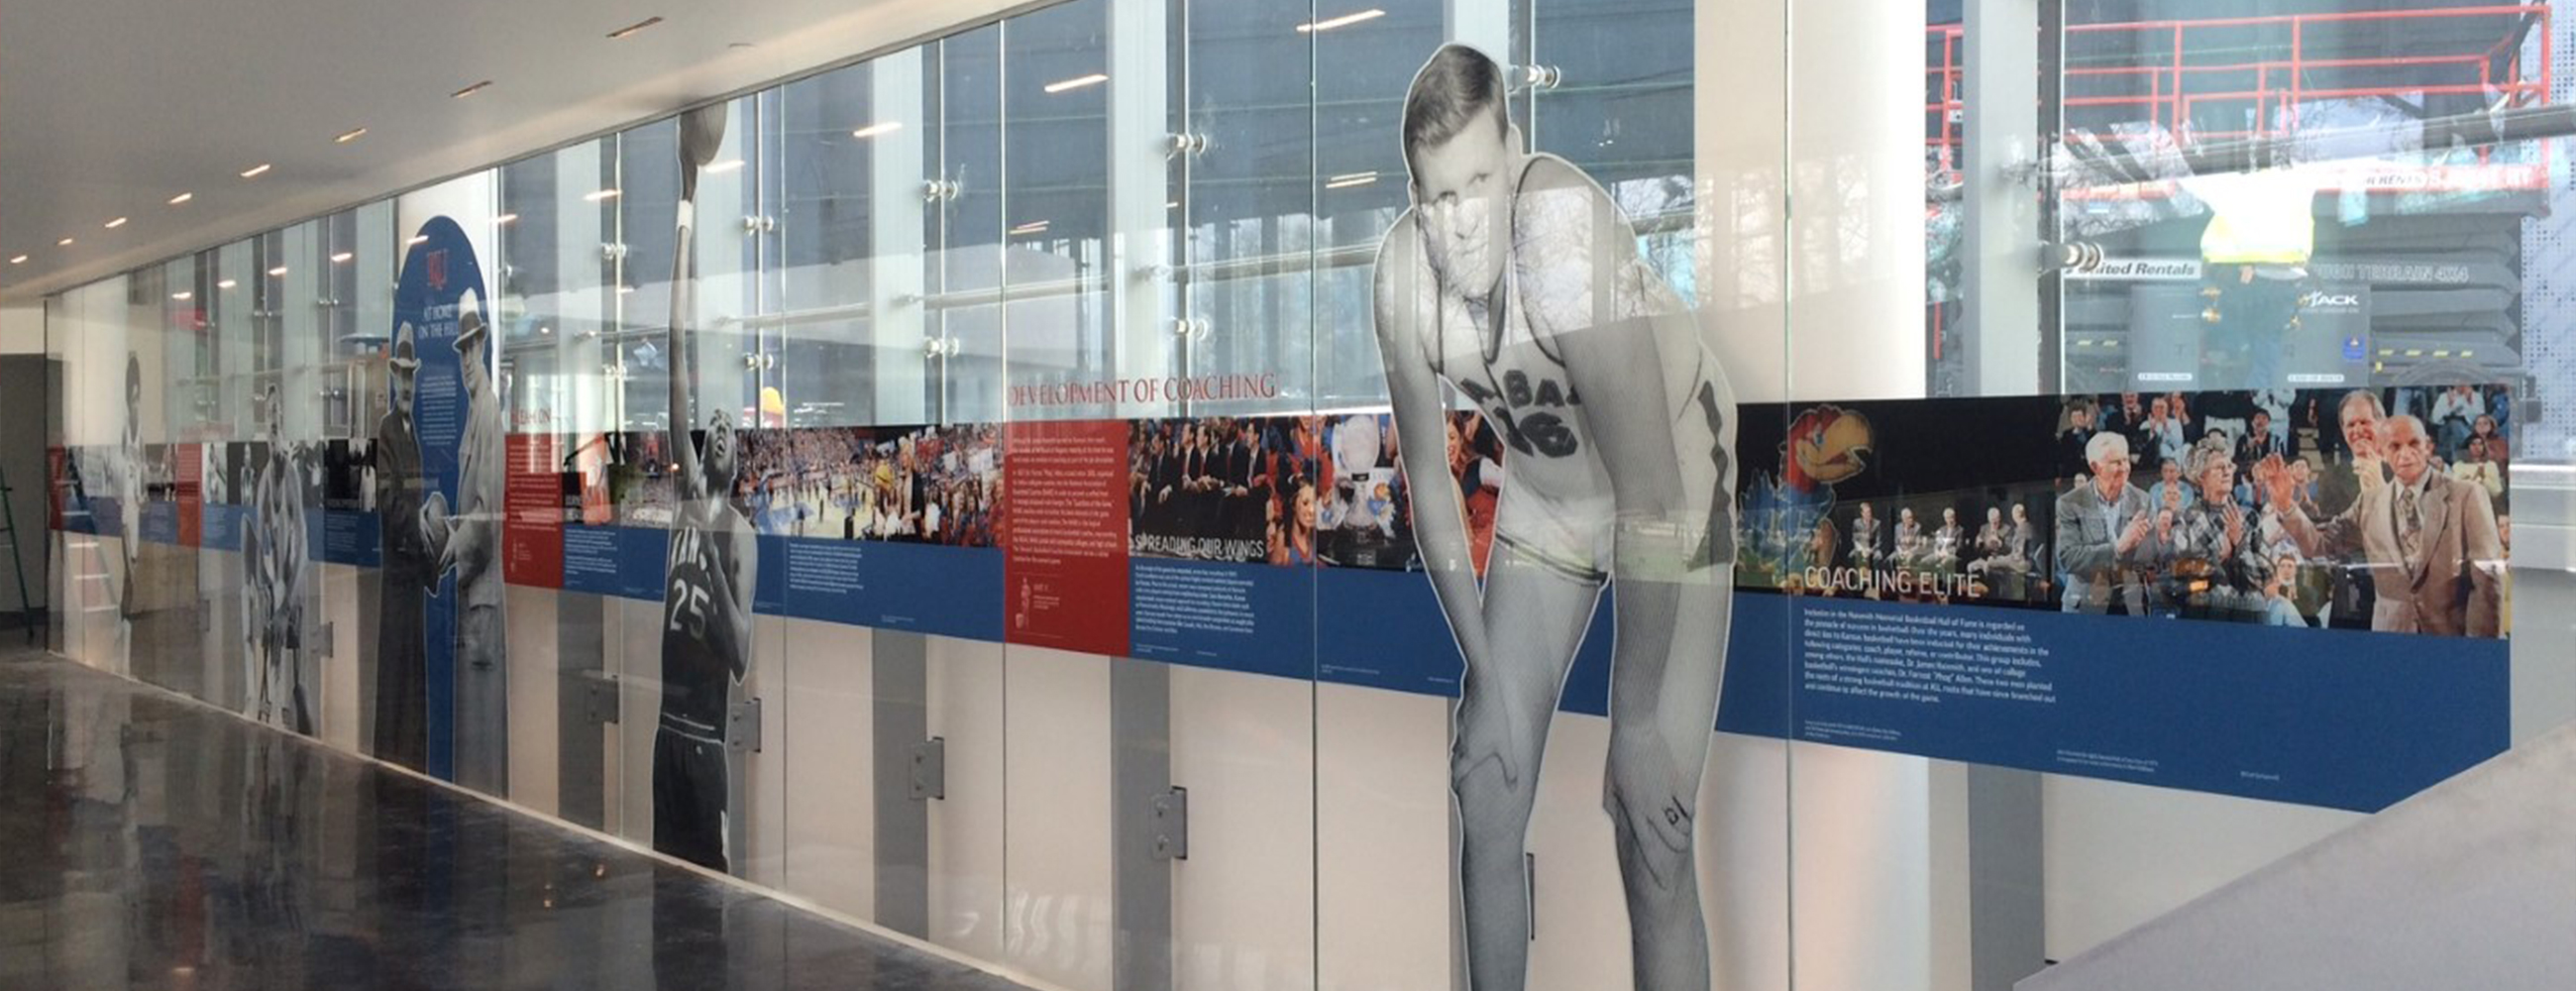 Inside Kansas University, a view of the glass mural depicting images and copy from the history of basketball.